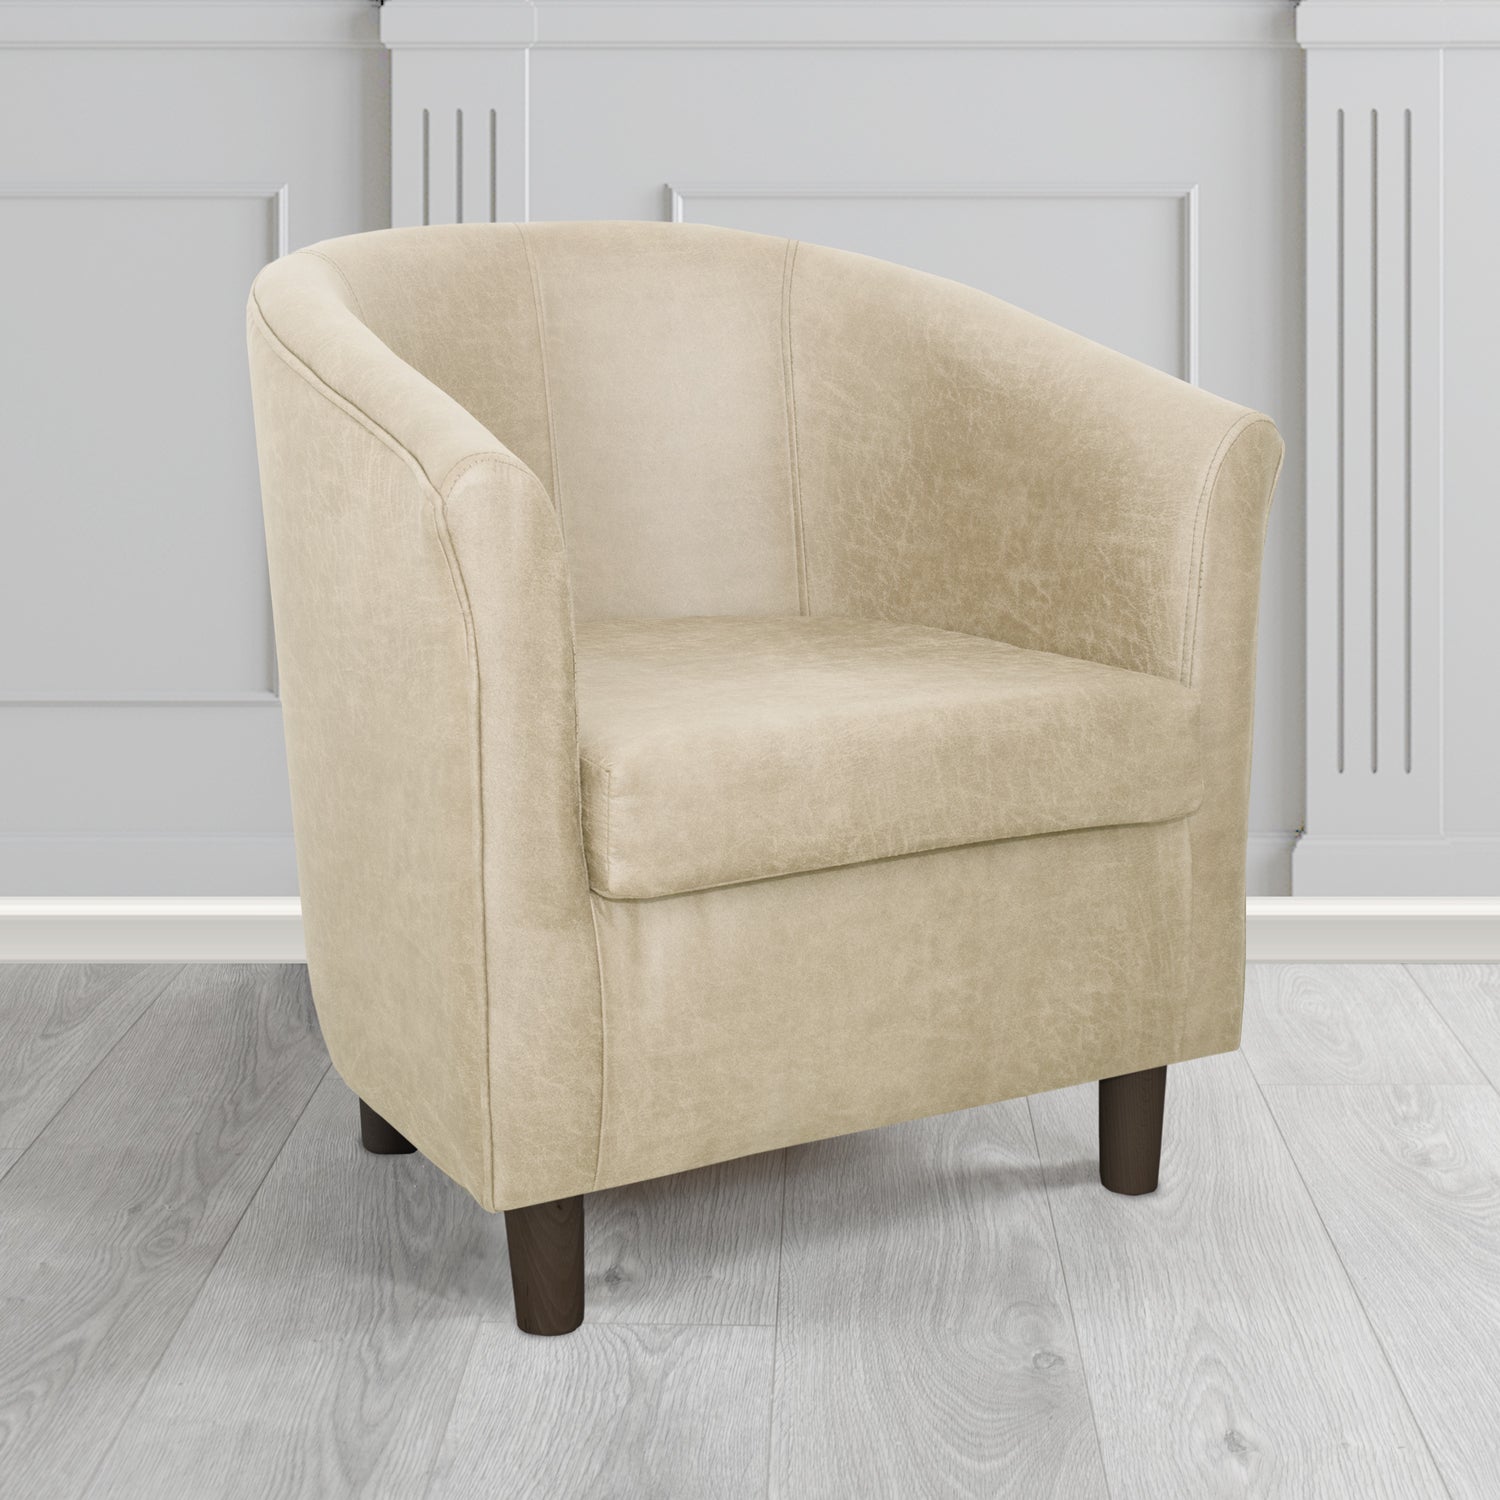 Tuscany Beige Nevada Faux Leather Tub Chair - The Tub Chair Shop